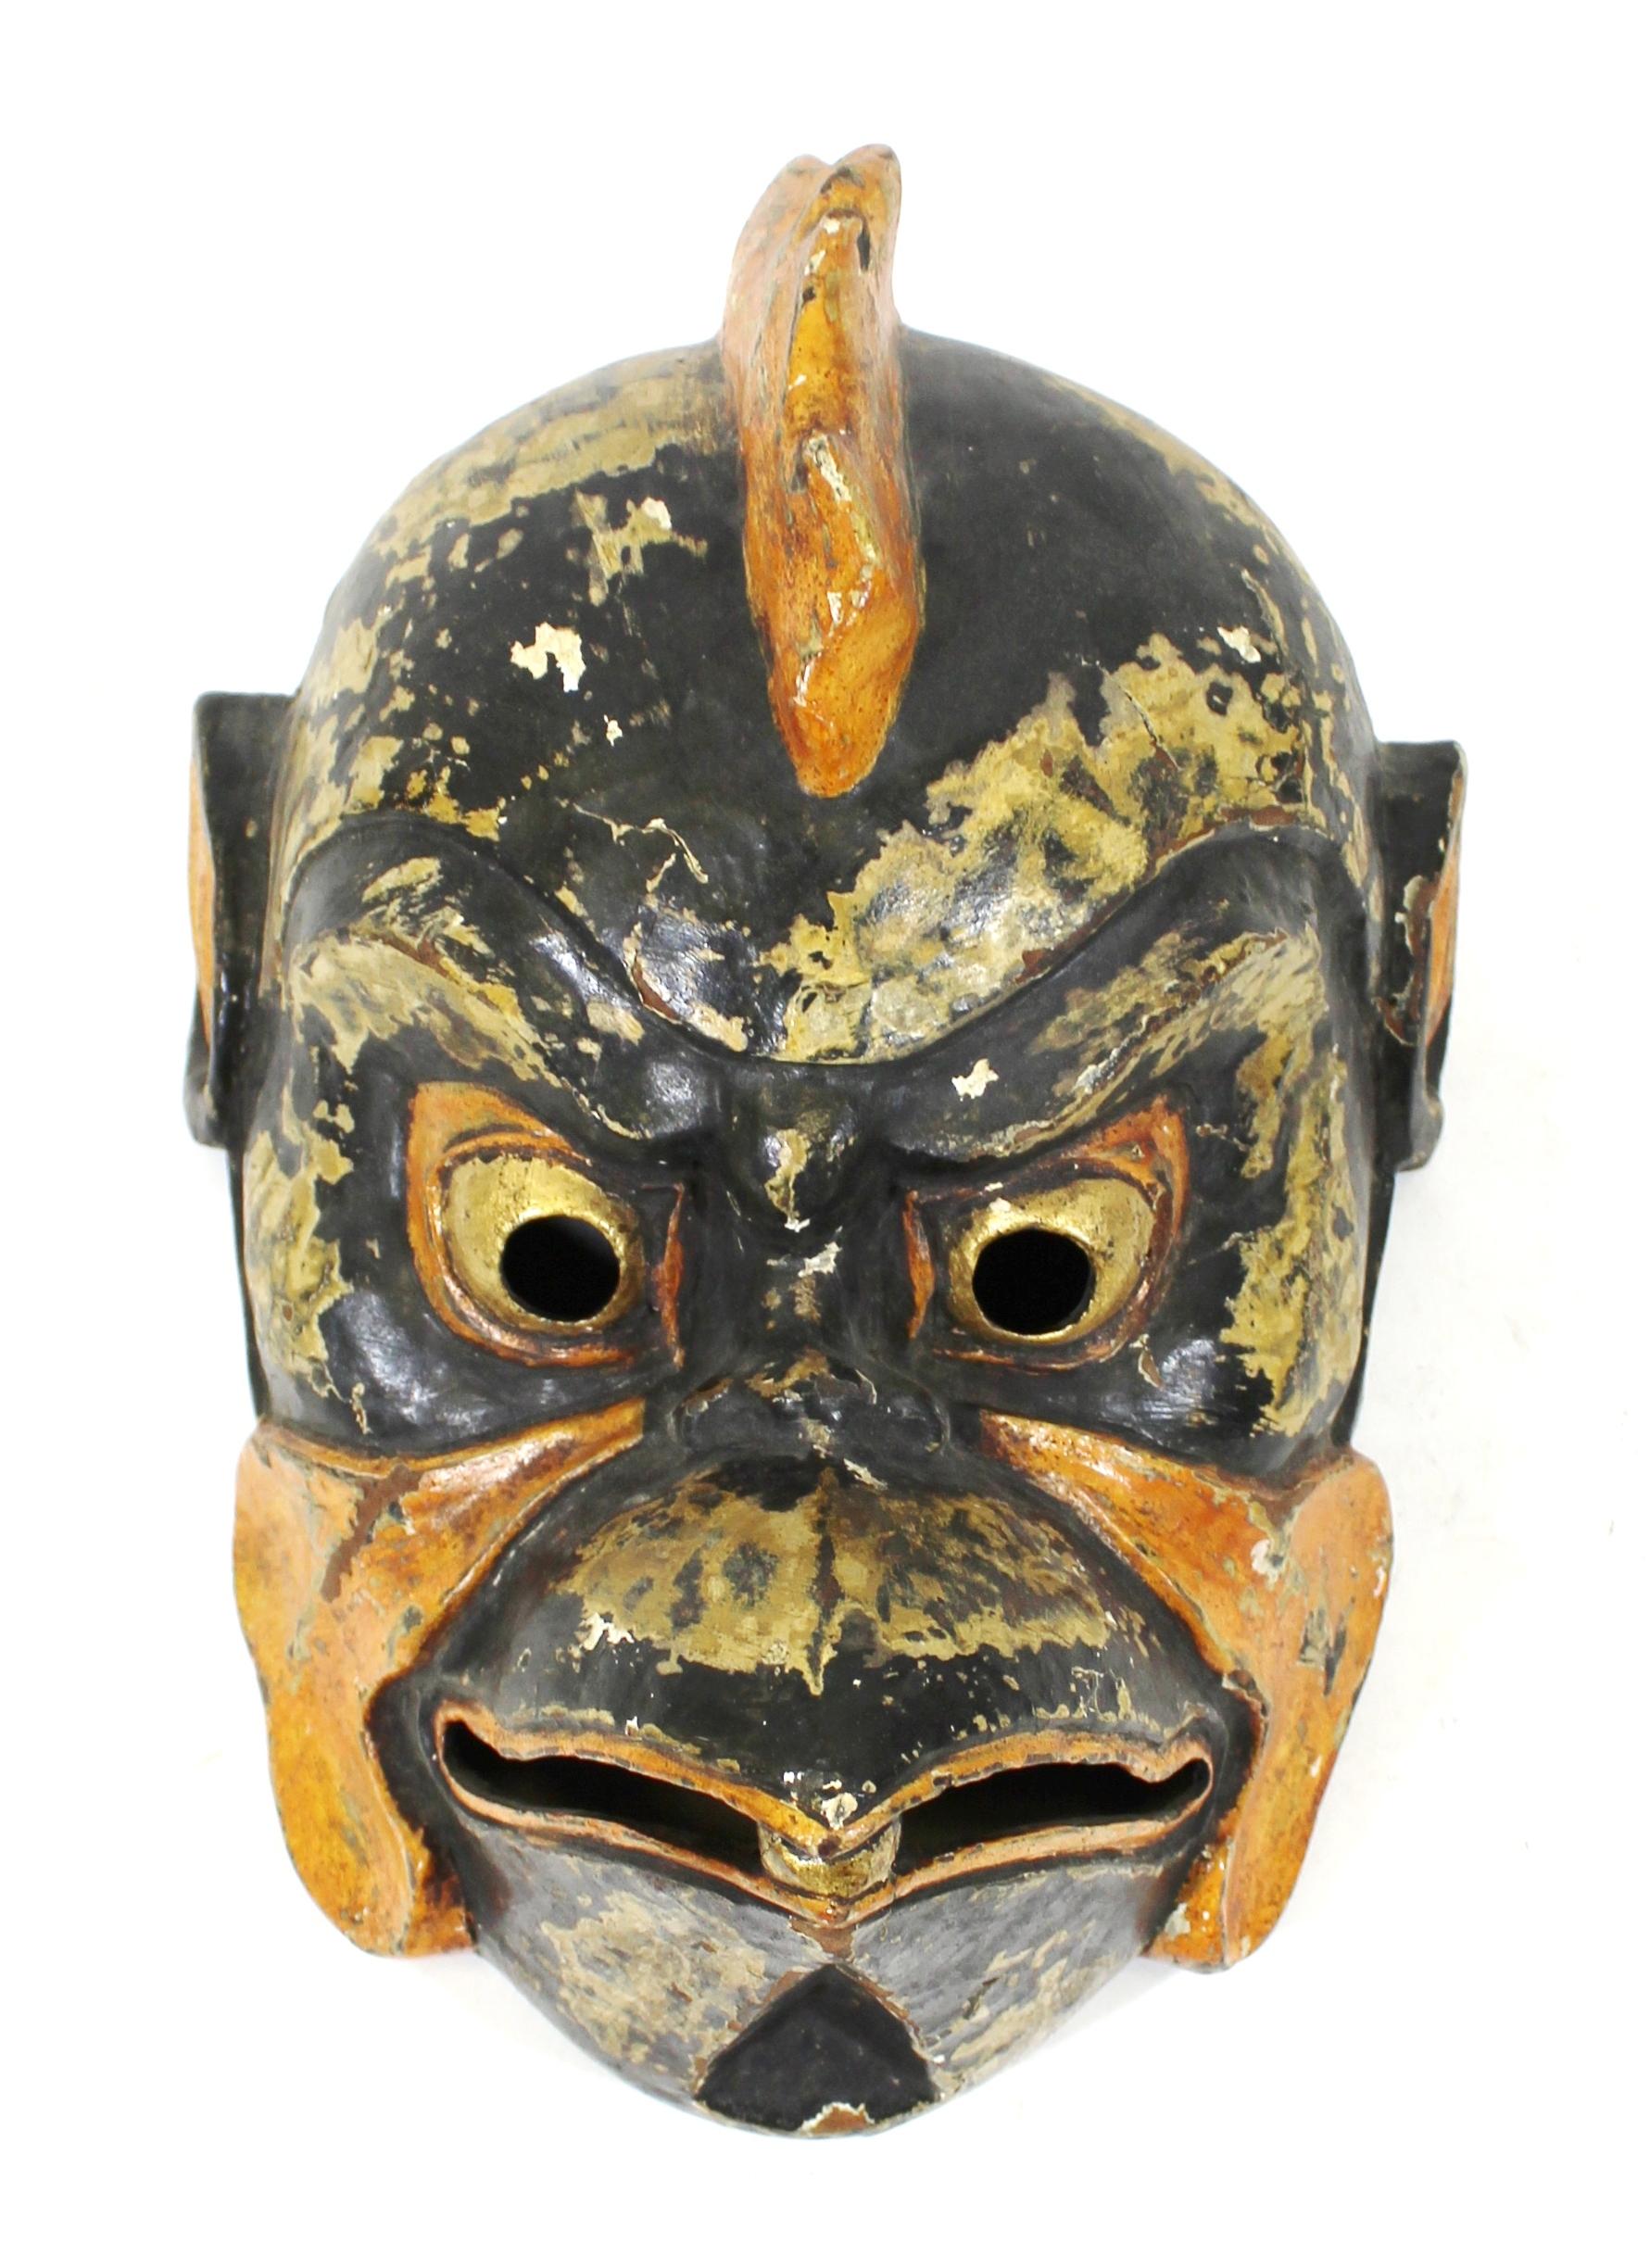 Japanese carved, painted and parcel gilt wood mask of Tengu, the Japanese human-bird hybrid folk religion character. Early 20th century, with old hand-written label glued to the inside.